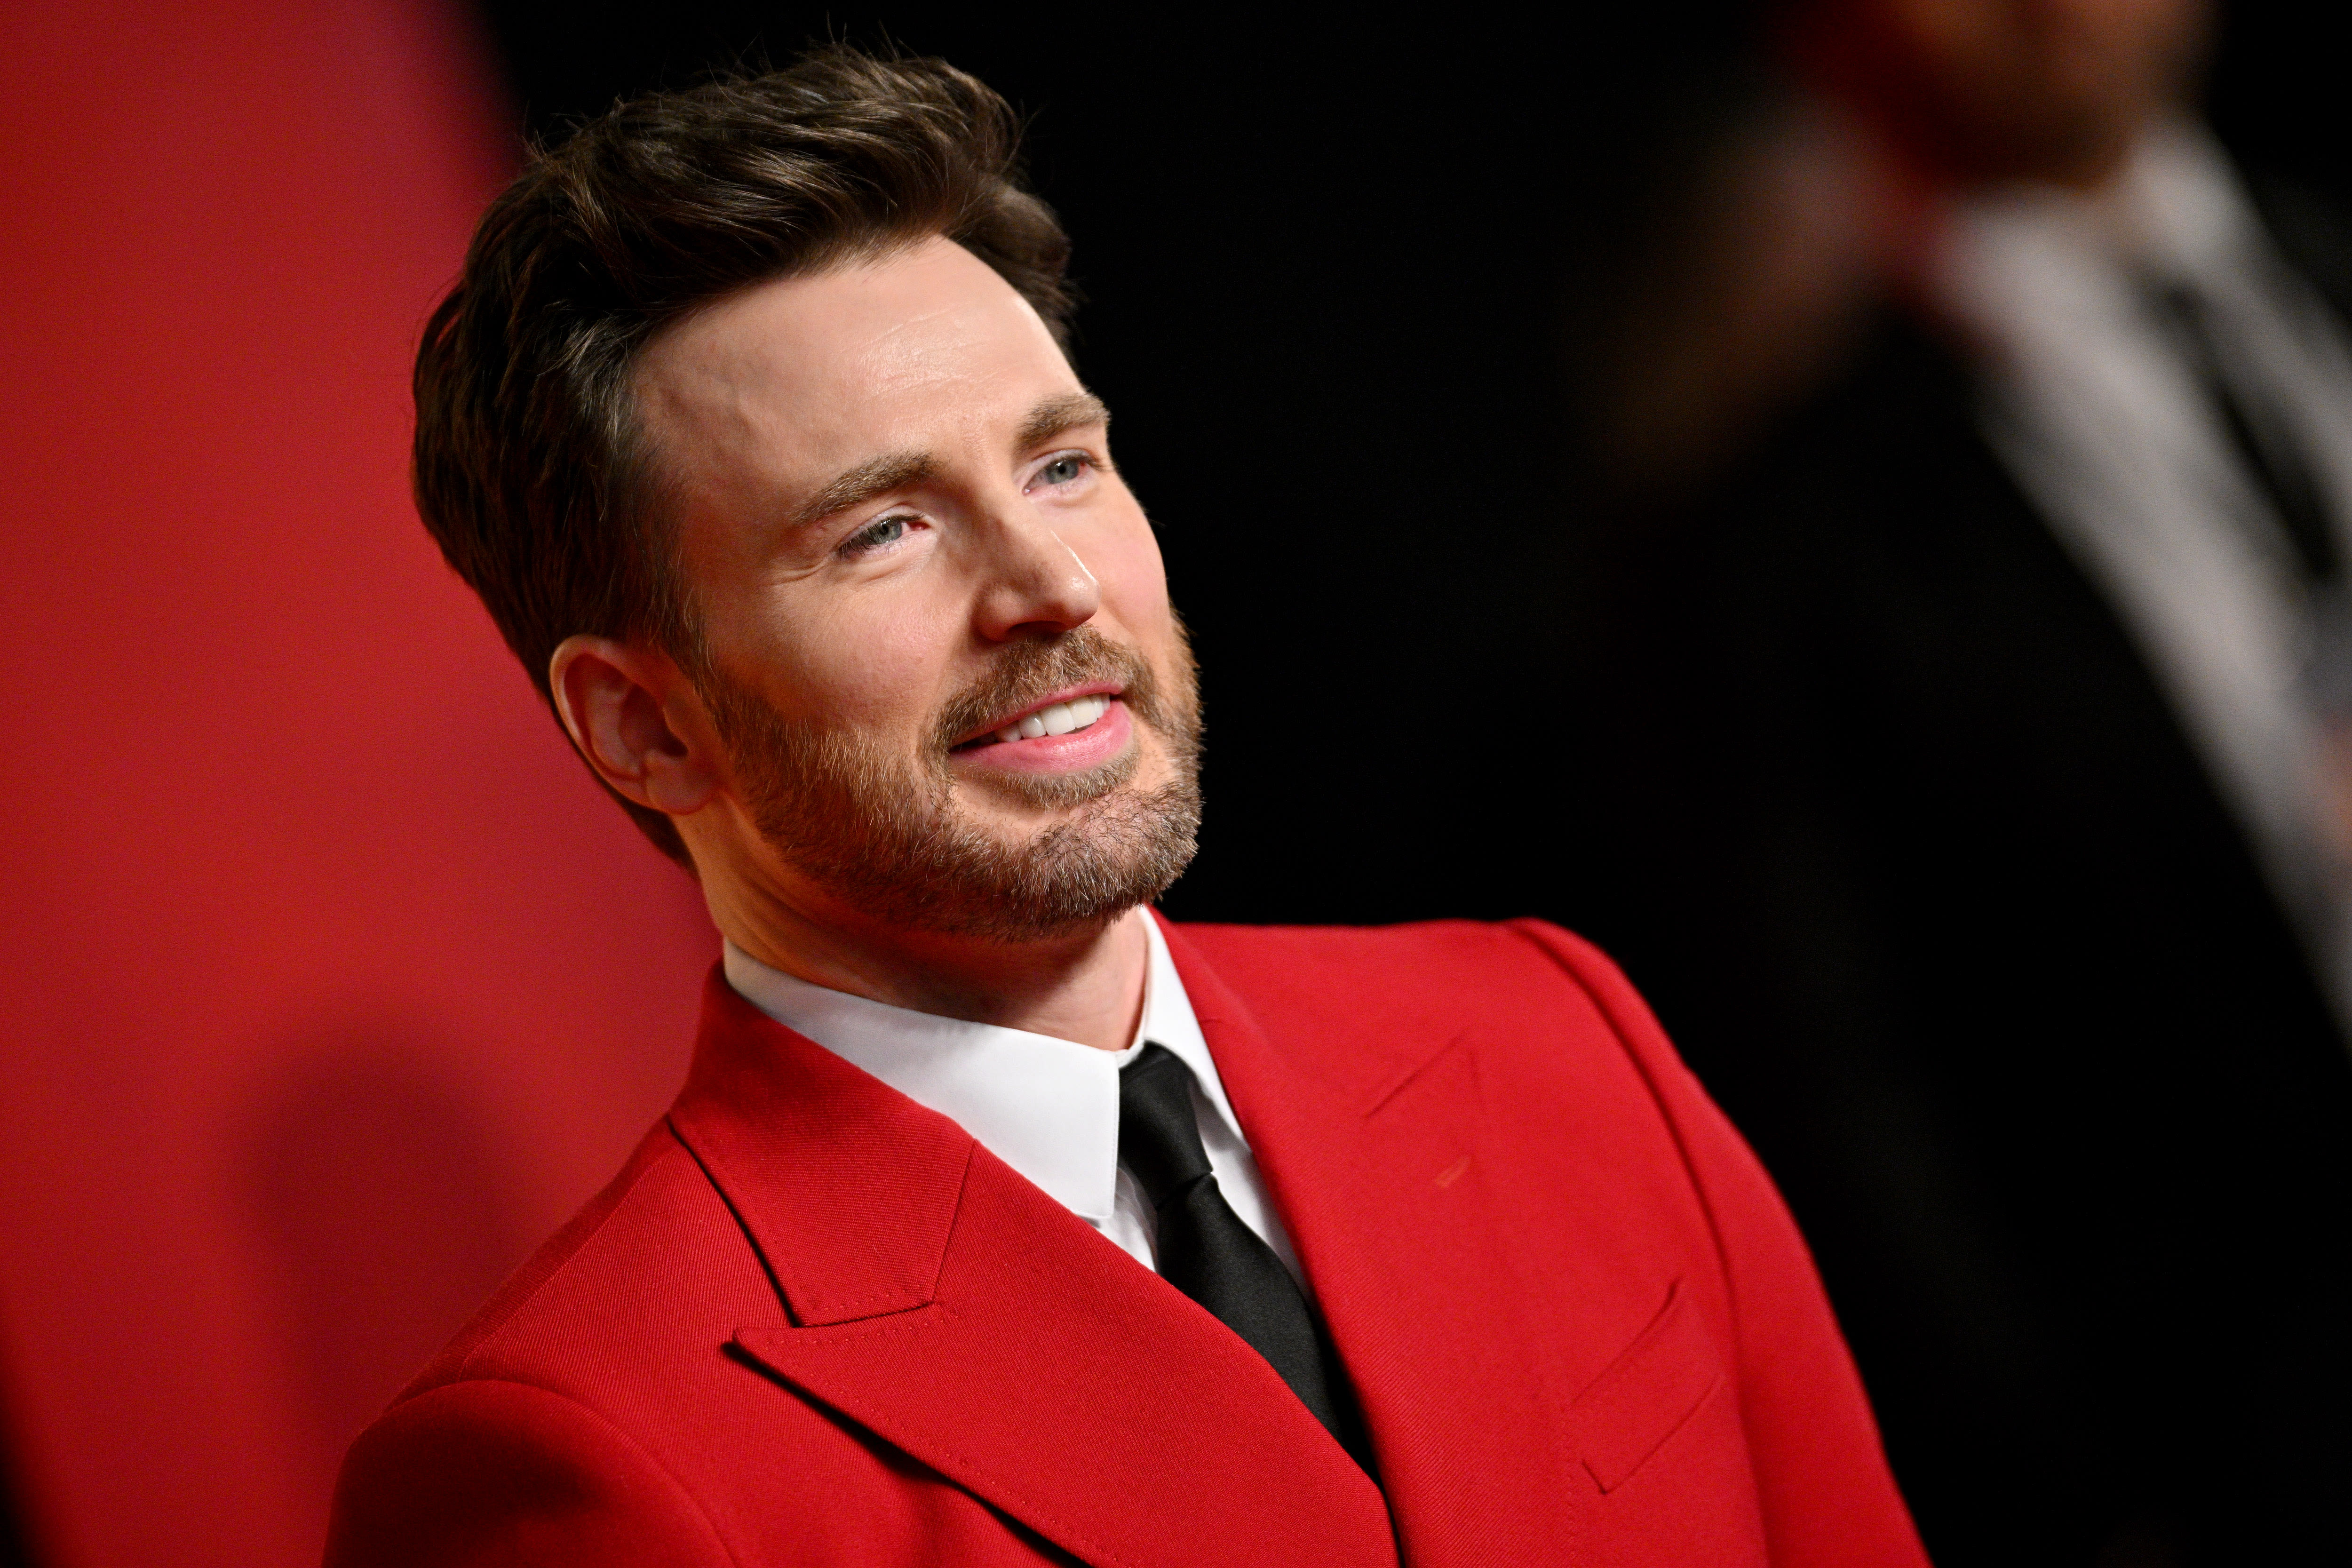 Chris Evans Breaks Silence On Infamous Photo Of Him Appearing To Autograph A Bomb